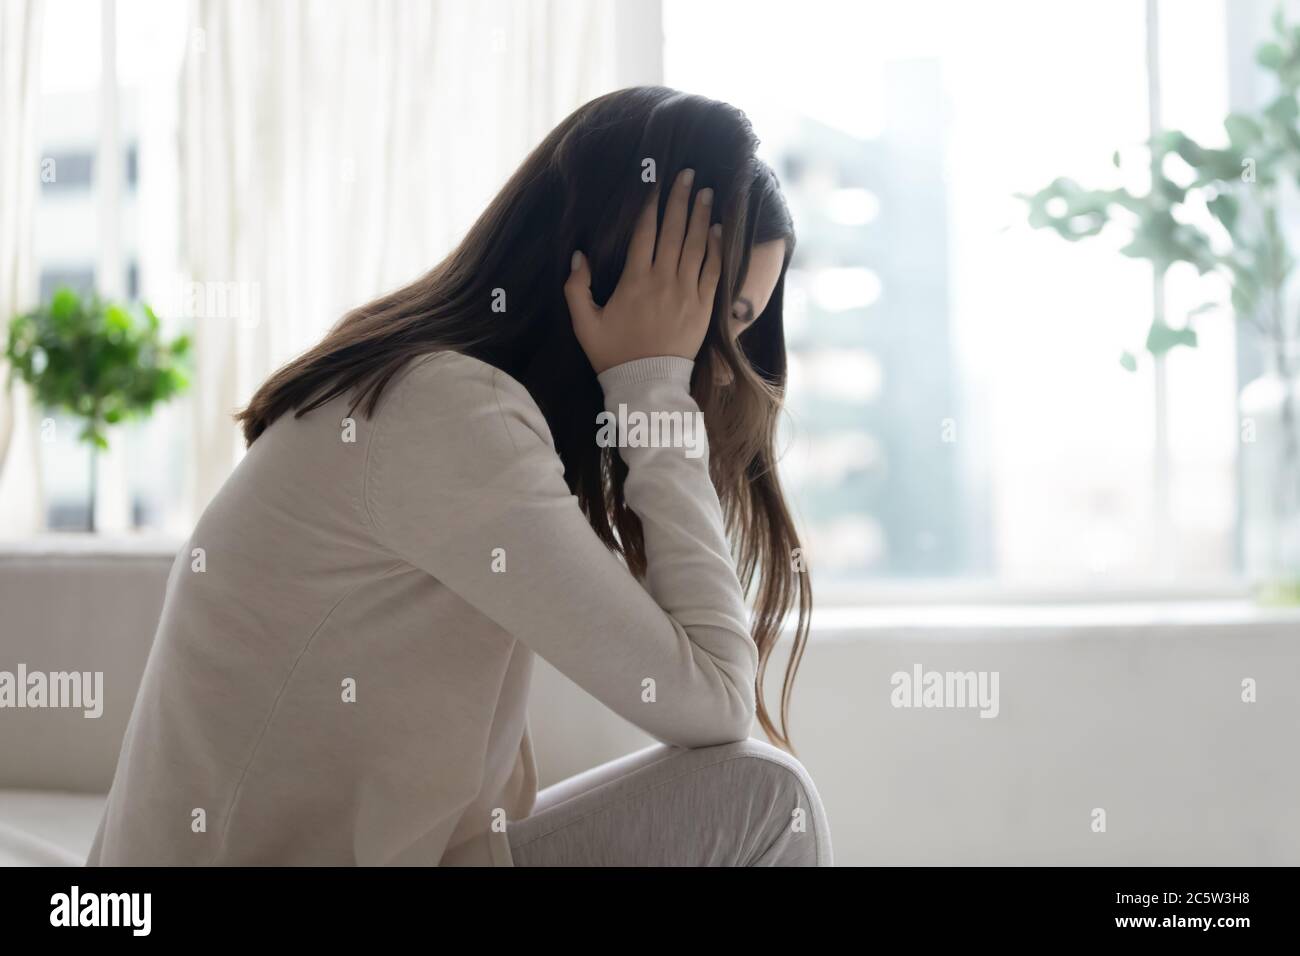 Unhappy depressed woman sitting alone, thinking about problems Stock Photo